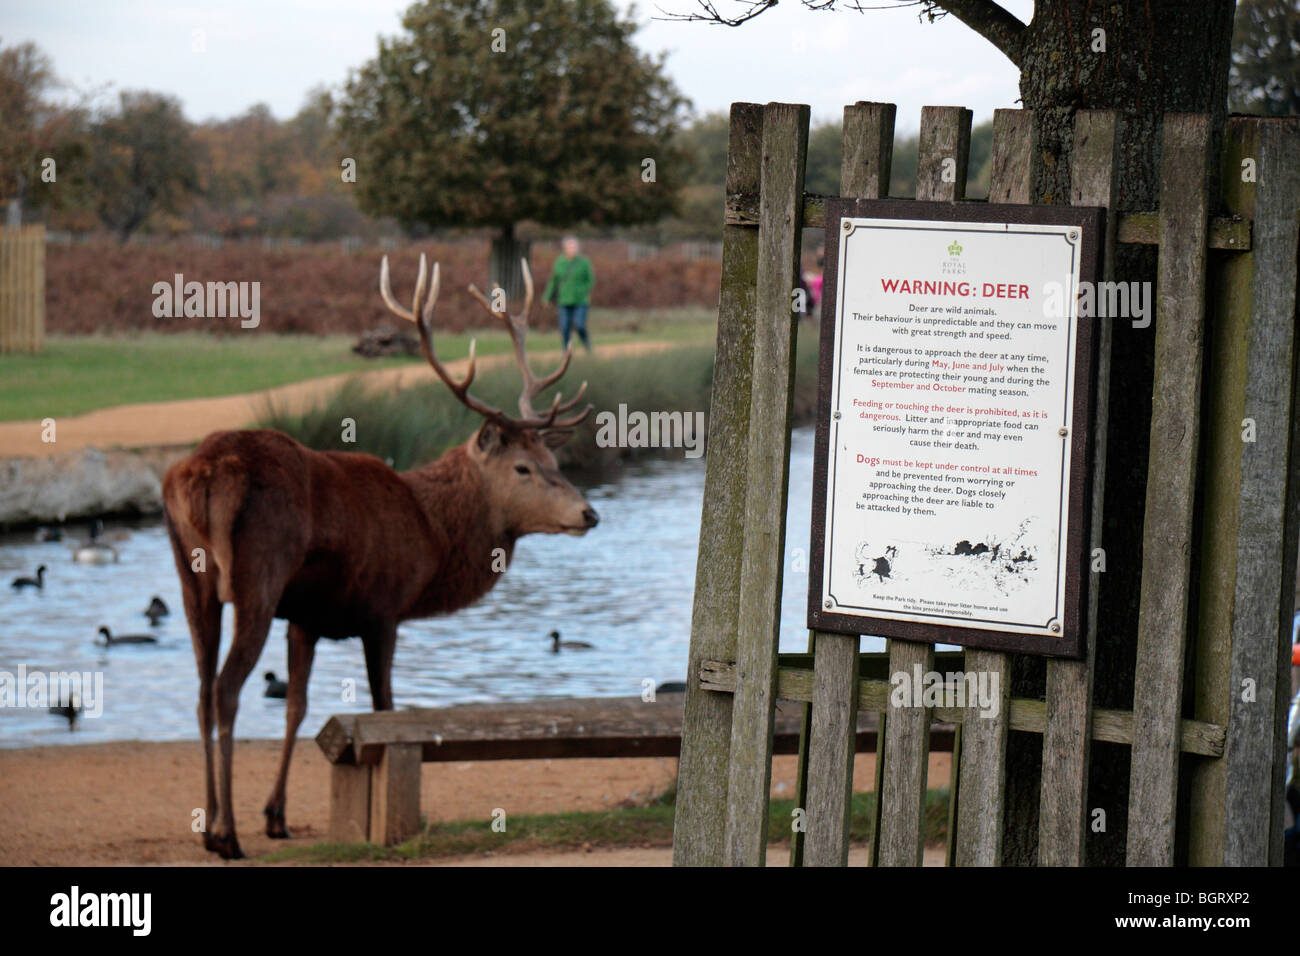 https://c8.alamy.com/comp/BGRXP2/a-large-male-stag-red-deer-on-a-public-path-beside-a-small-pond-in-BGRXP2.jpg